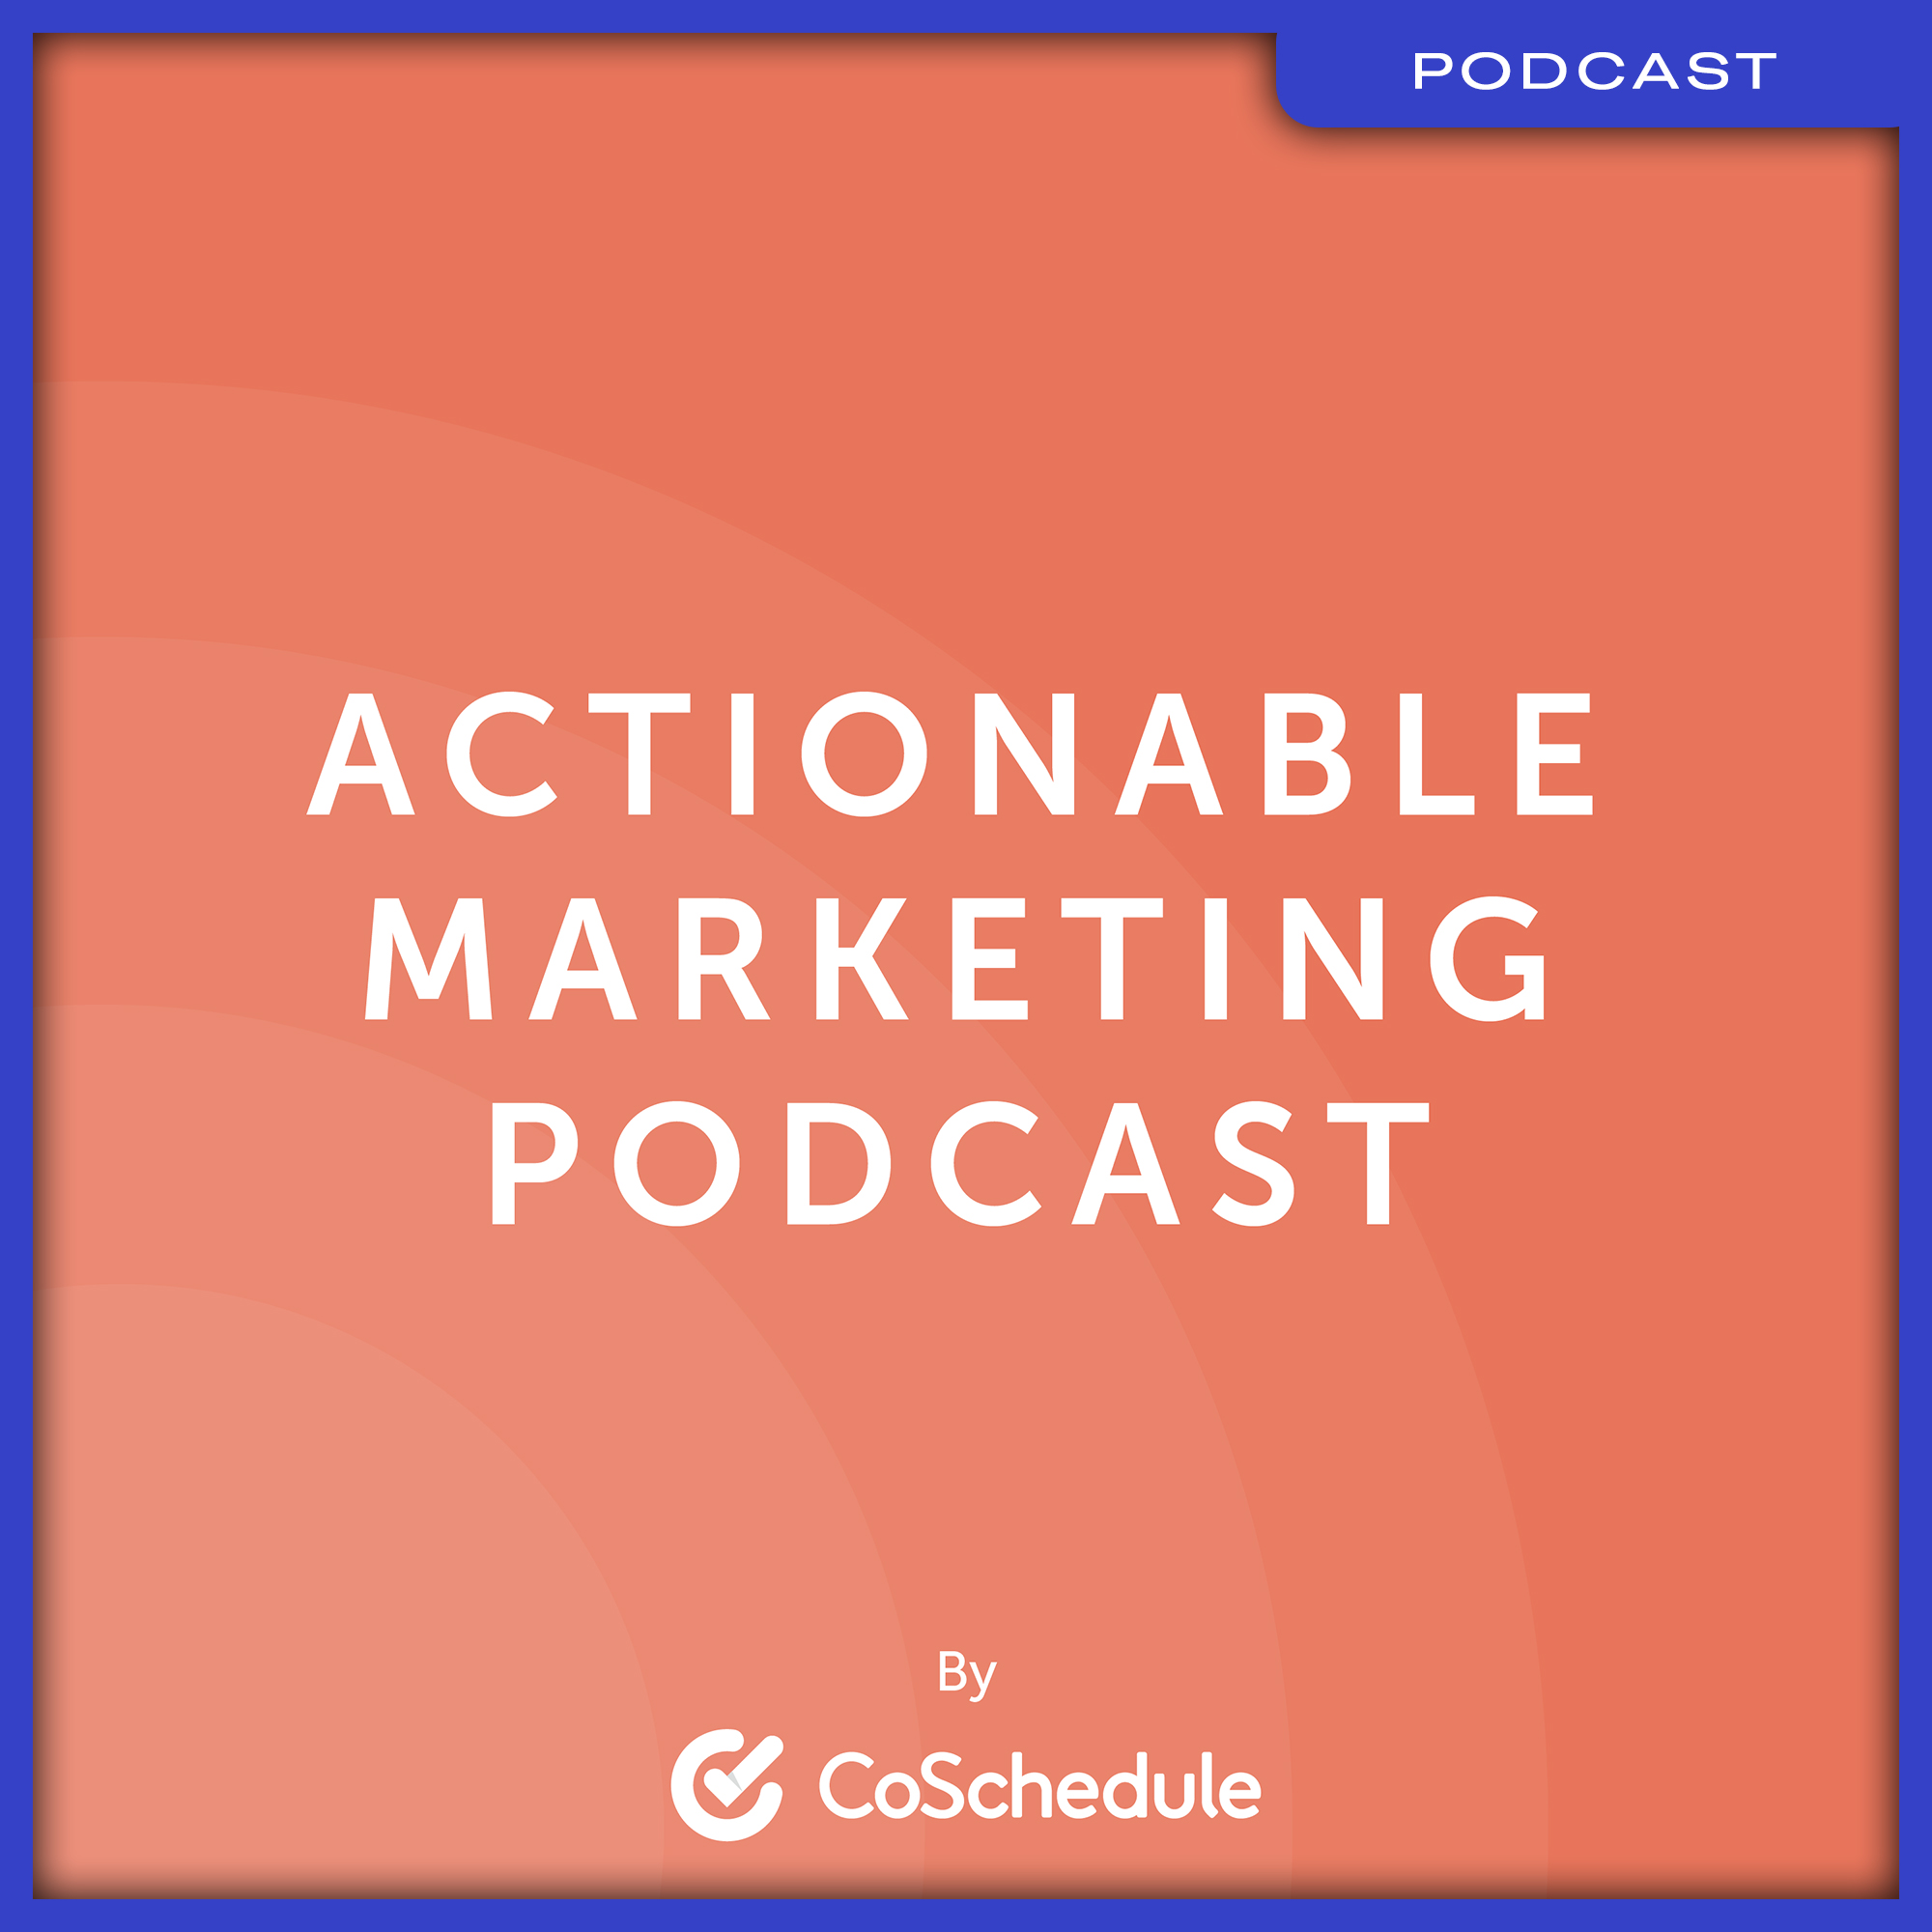 11-Podcast--Actionable-Marketing-Podcast--Retain-an-Engaged-Audience-with-Lindsay-Tjepkema-from-Casted